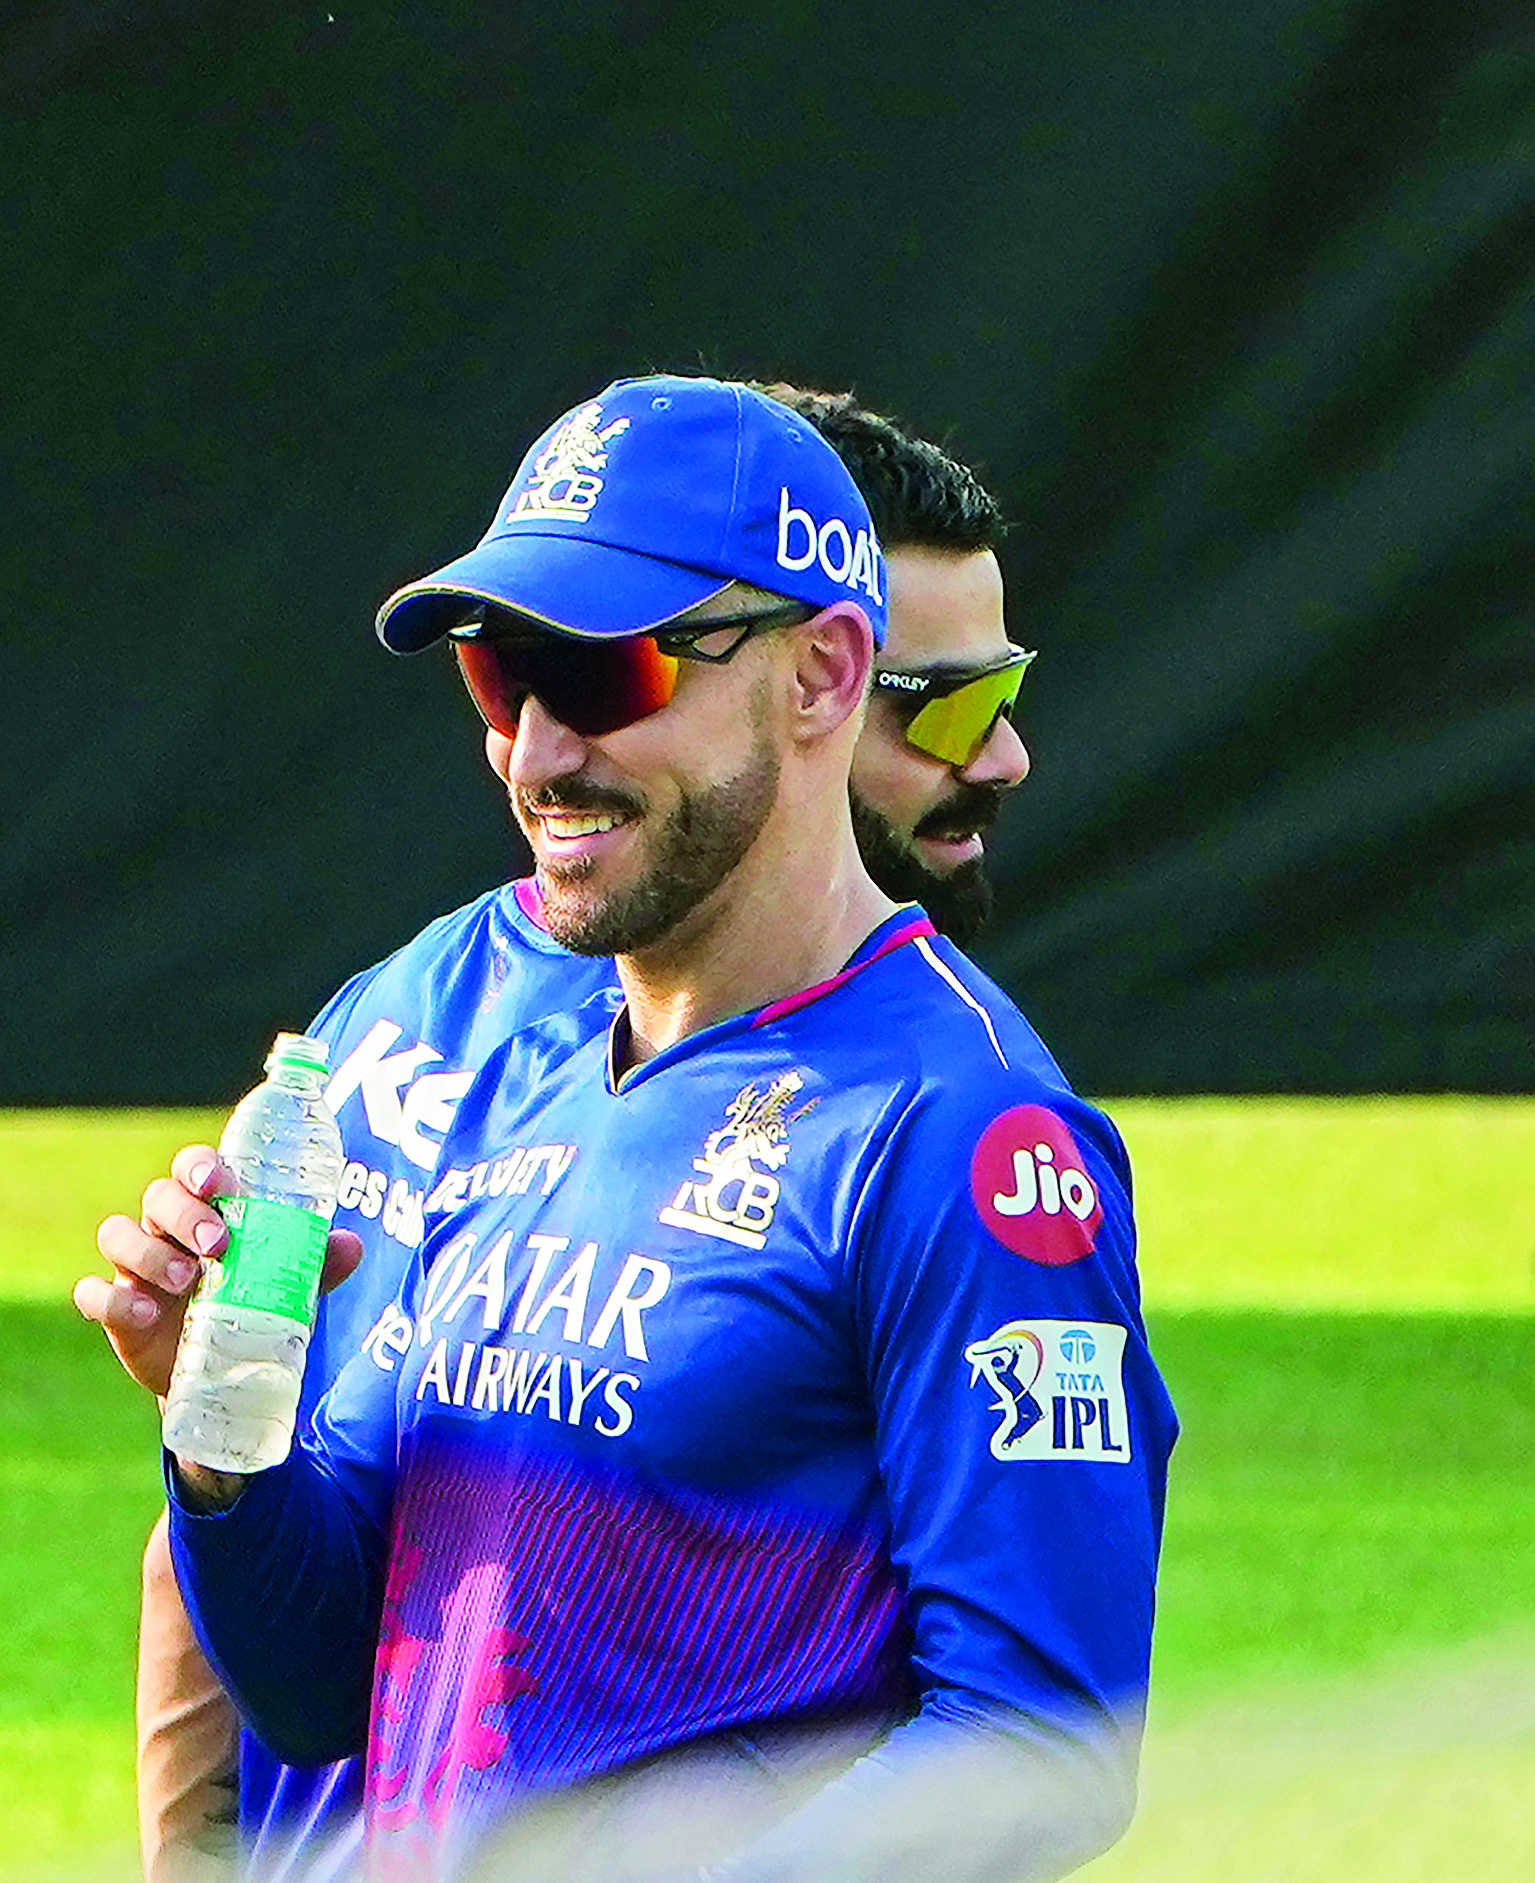 There is a lot left in the tank, says   du Plessis